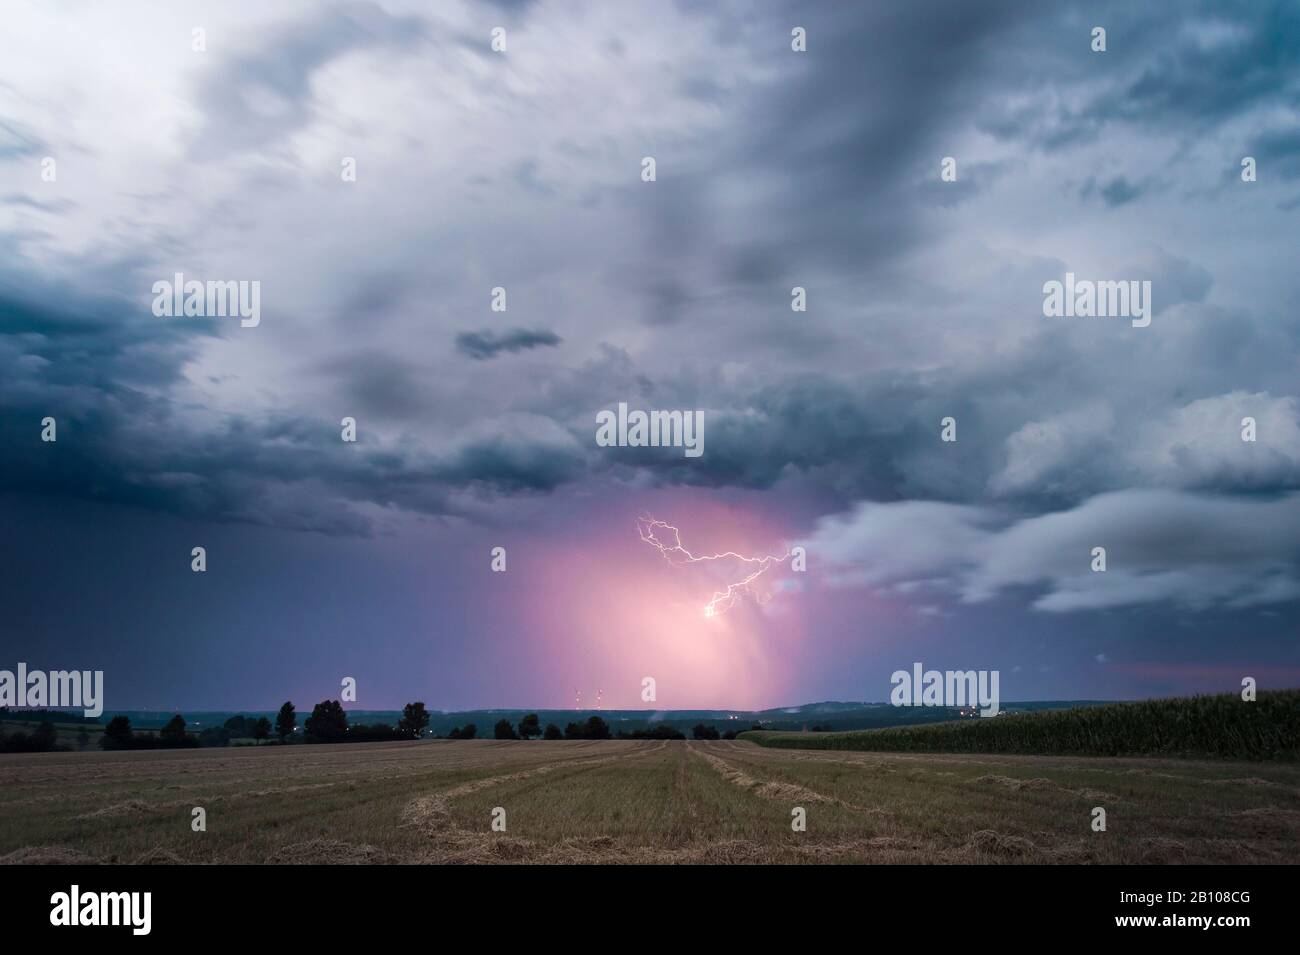 Precipitation illuminated by lightning on the back of a withdrawing supercell near Feuchtwangen, Baden-Württemberg, Germany Stock Photo